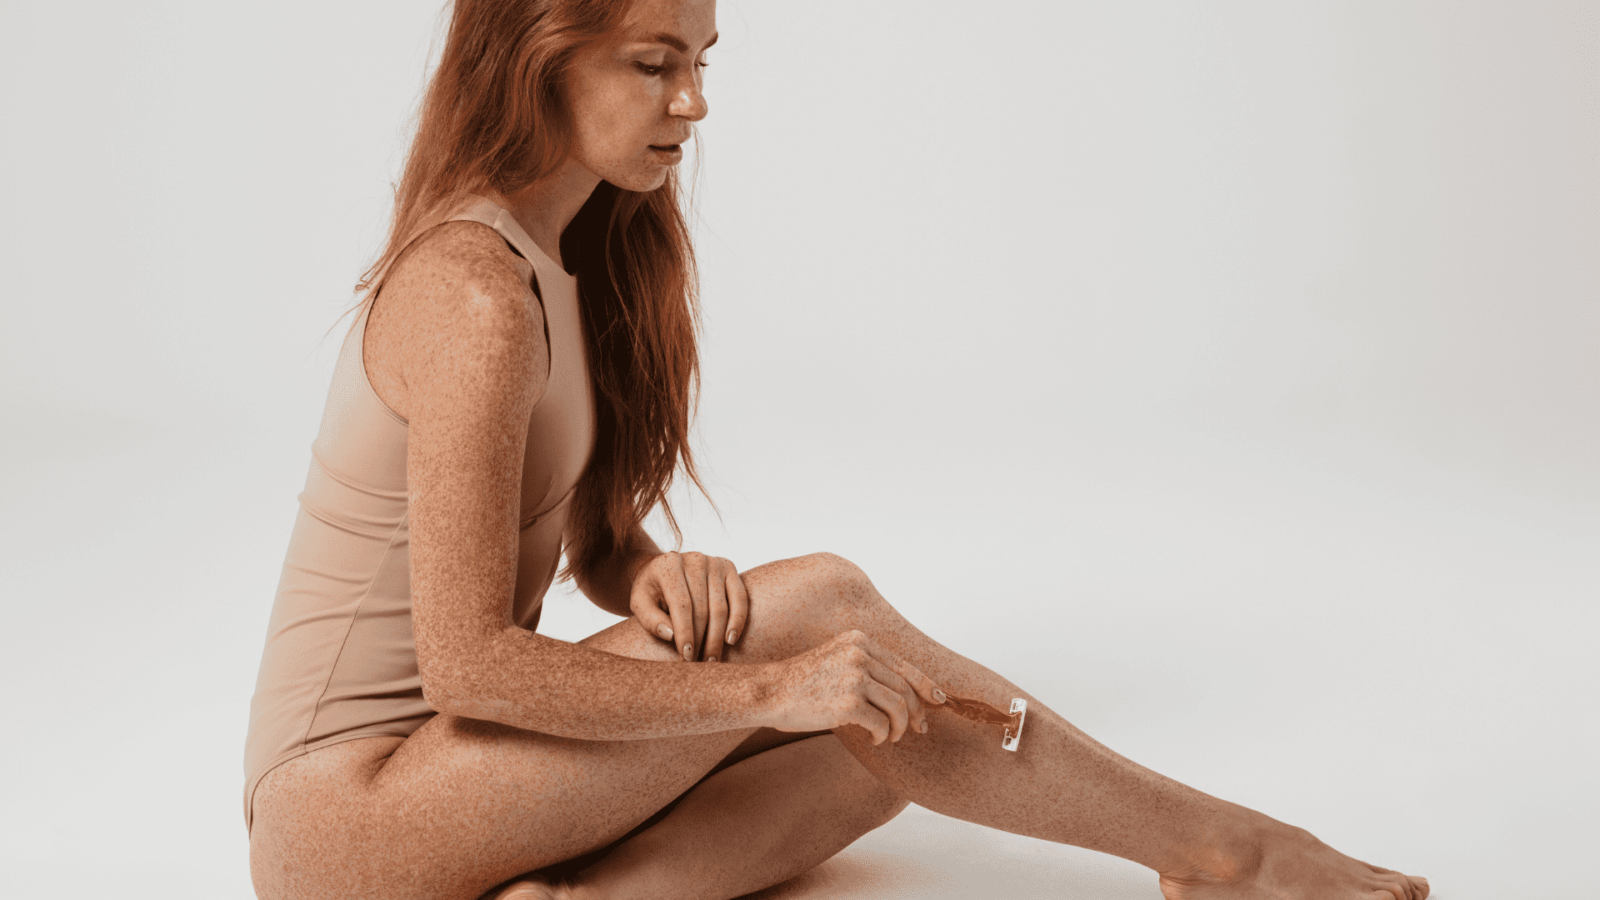 How Redheads Can Combat Ingrown Hairs